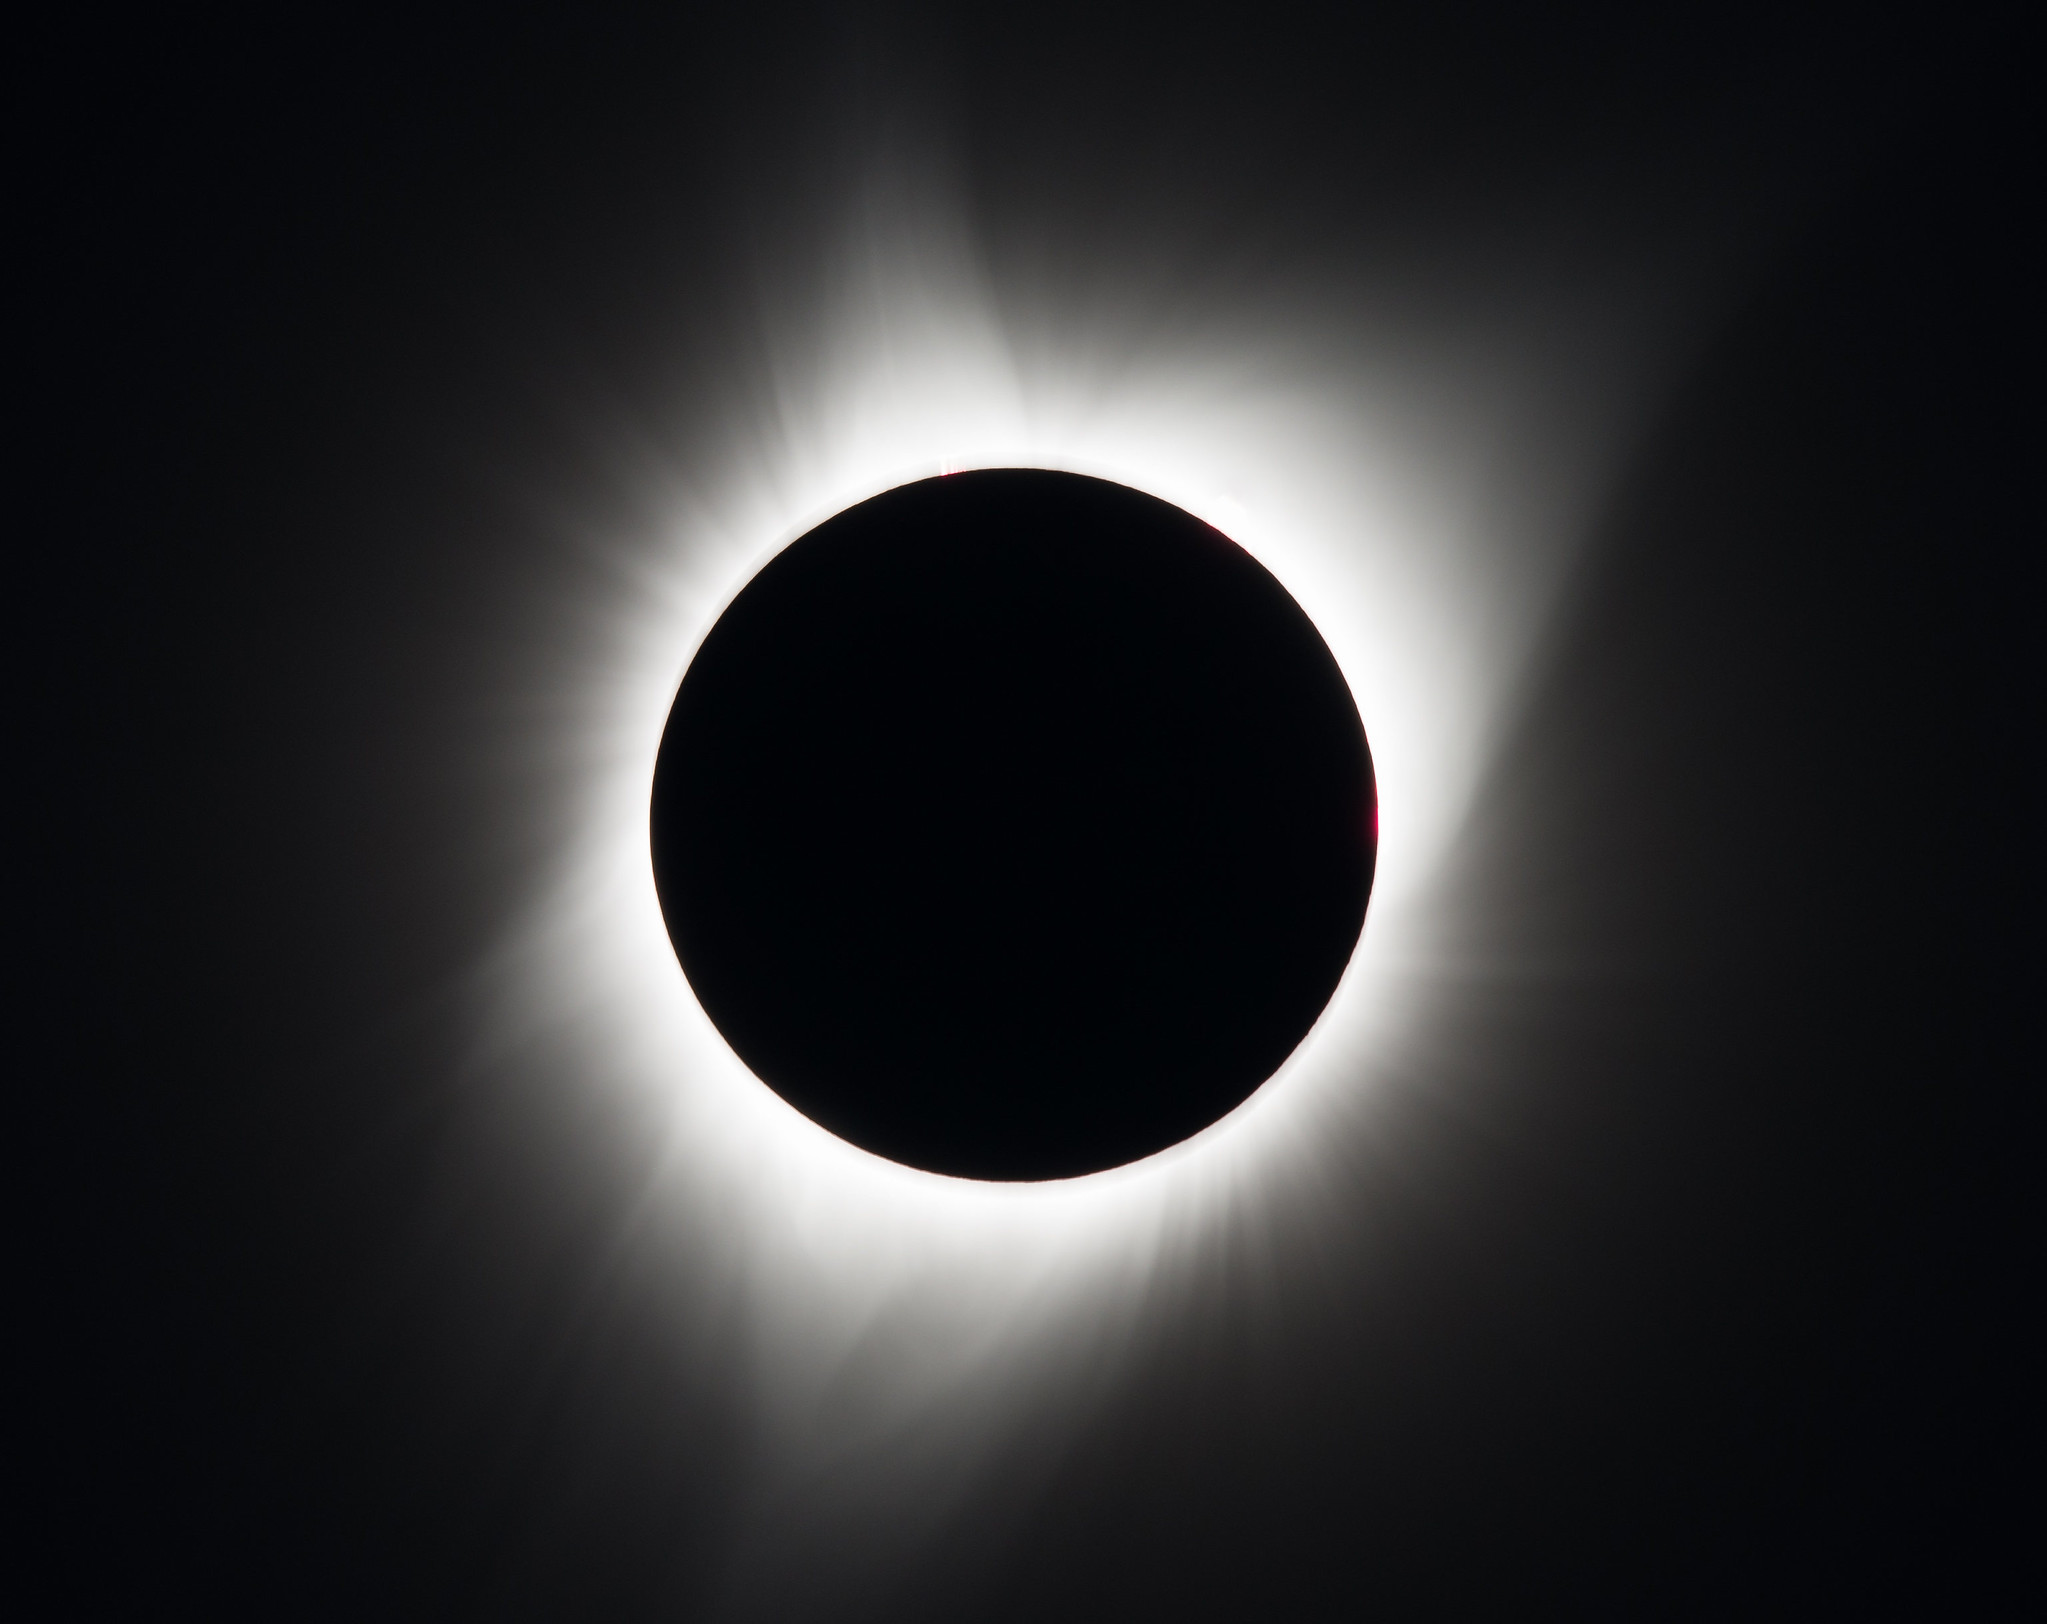 Against a black background is a total solar eclipse. In the middle is a black circle – the Moon. Surrounding it are white streams of wispy light, streaming out into the sky.